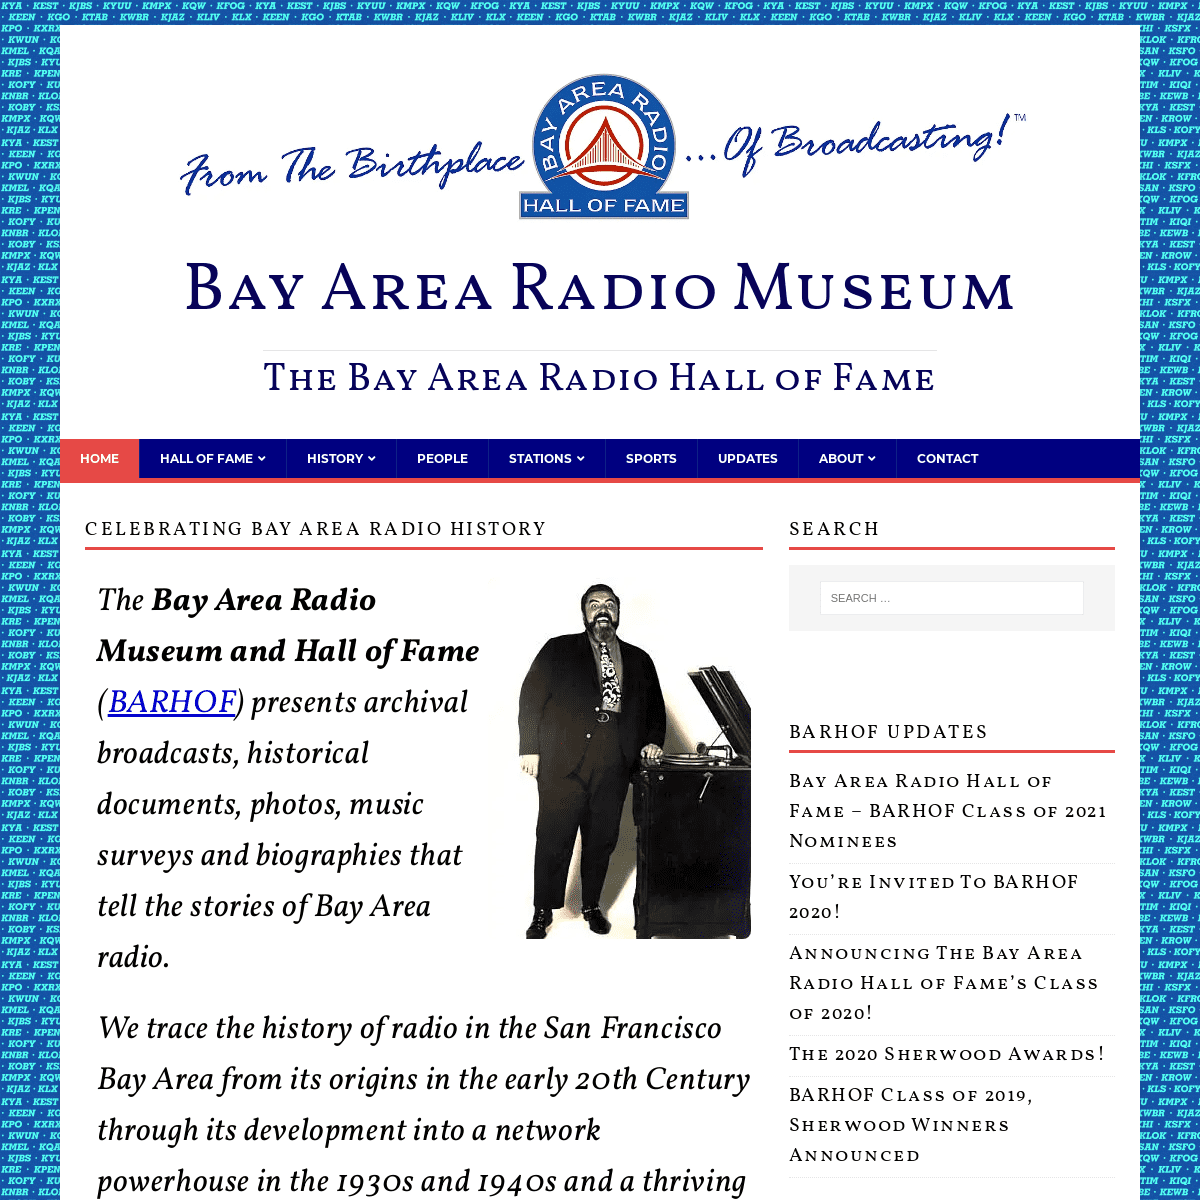 A complete backup of https://bayarearadio.org